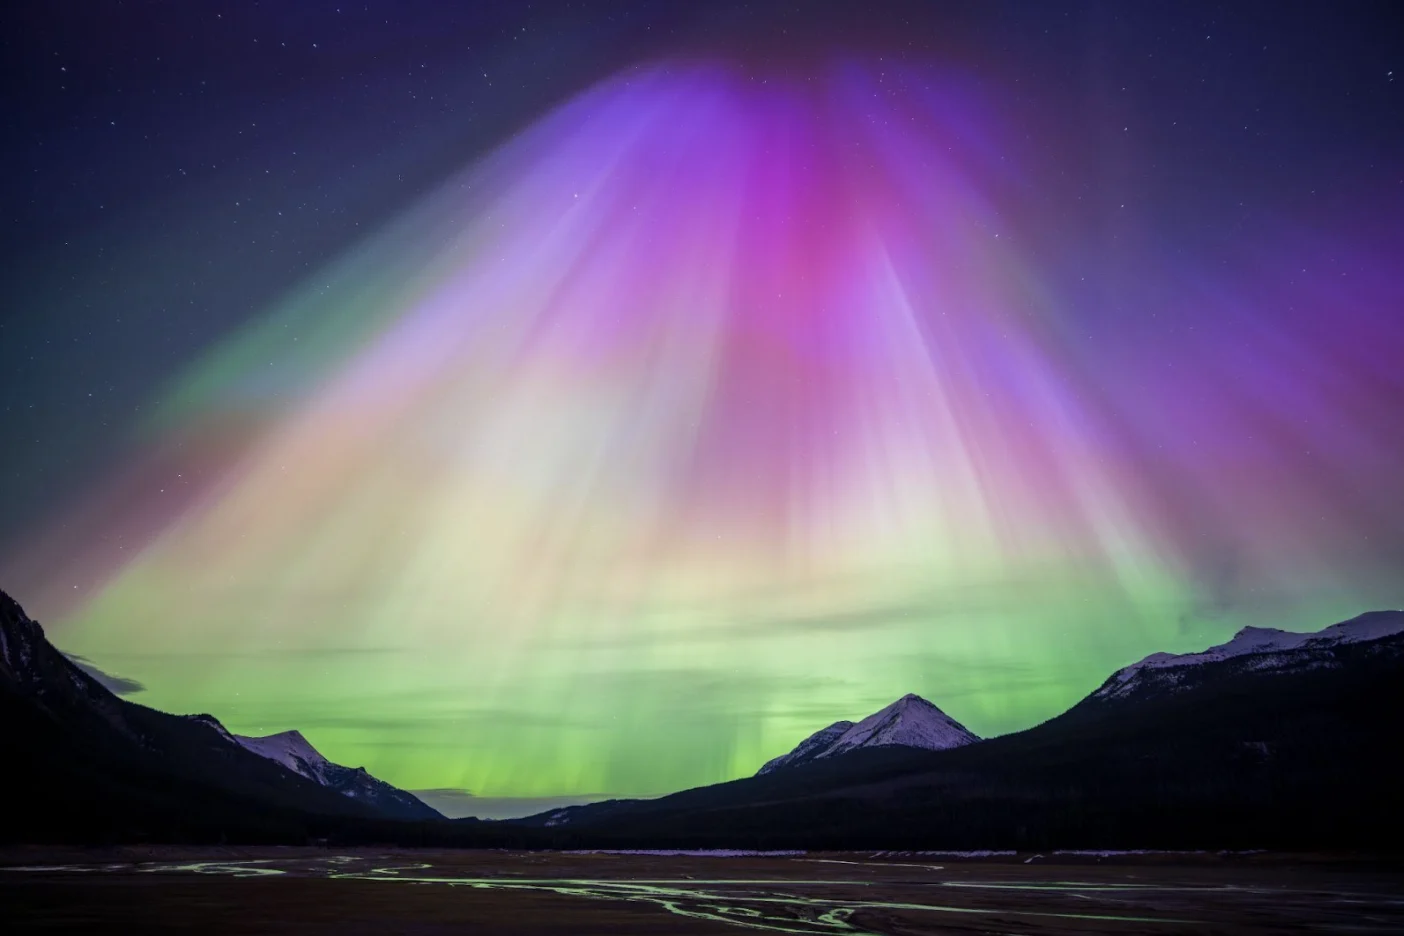 Provided for Sponsorship: The Great Aurora of May 10, 2024, Medicine Lake, Jasper National Park. Credit: Devin E. Shaw